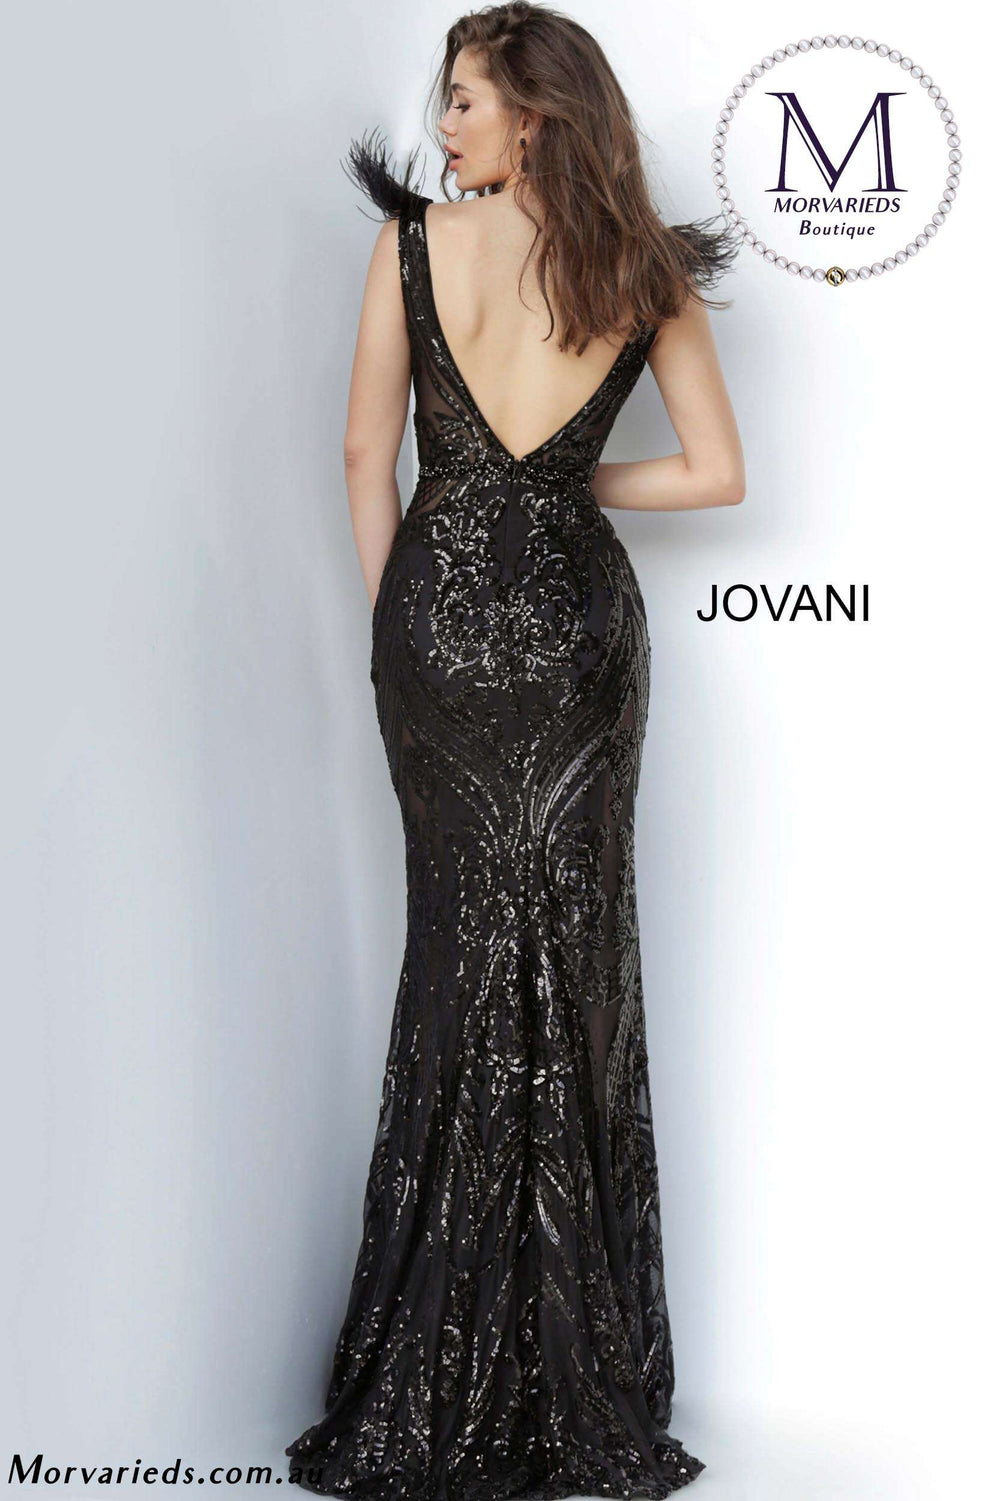 Sparkly Sequin Fitted Evening Dress Jovani 3180 - Morvarieds Fashion